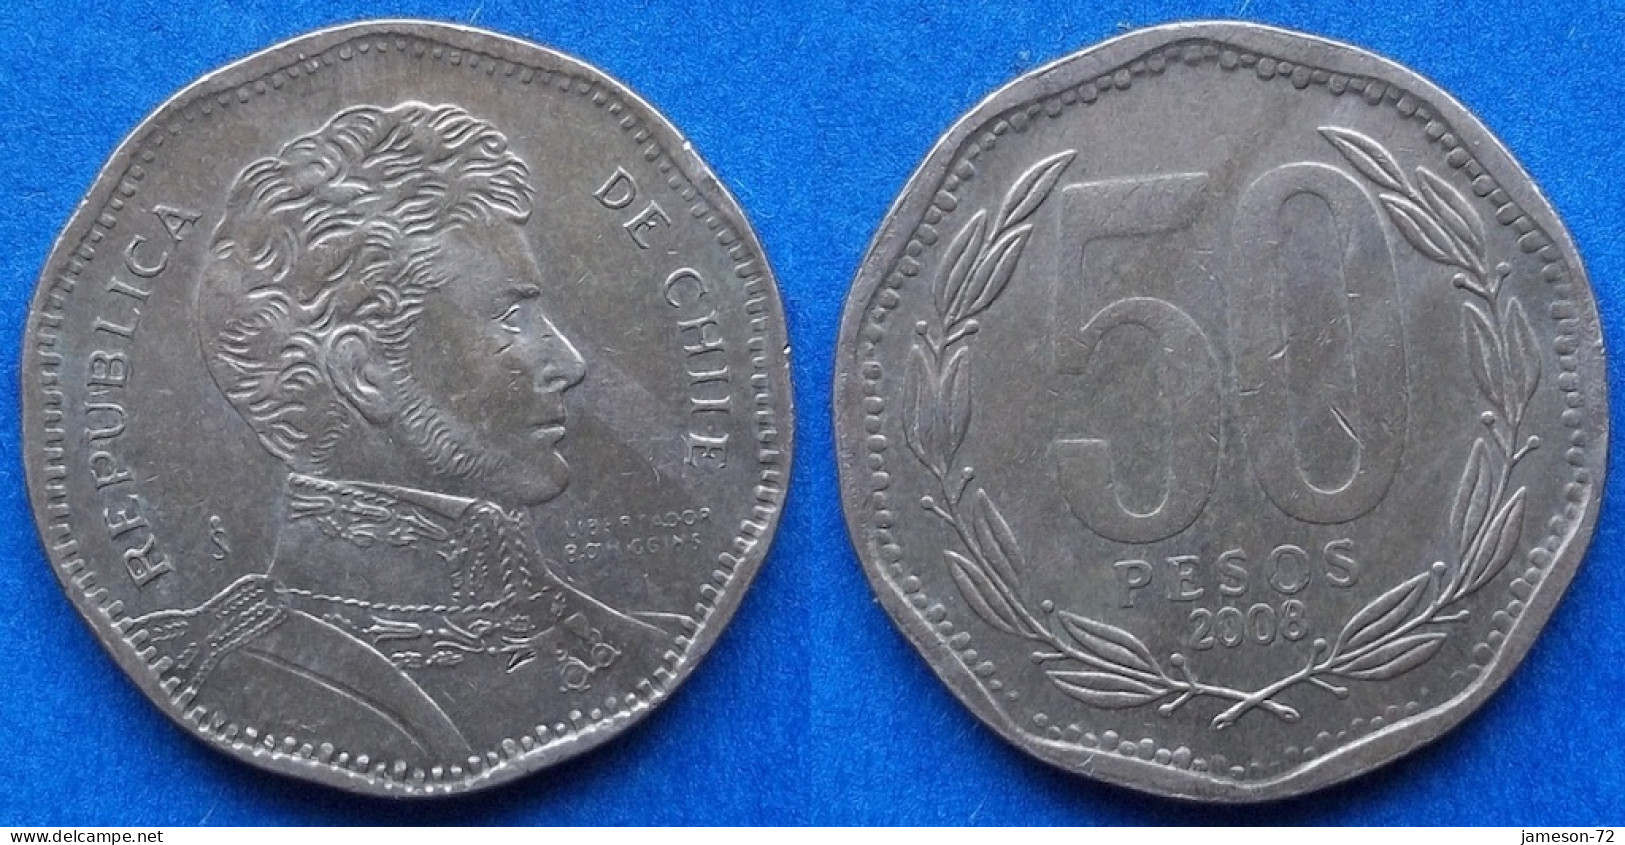 CHILE - 50 Pesos 2008 KM# 319.3 Monetary Reform (1975) - Edelweiss Coins - Chile